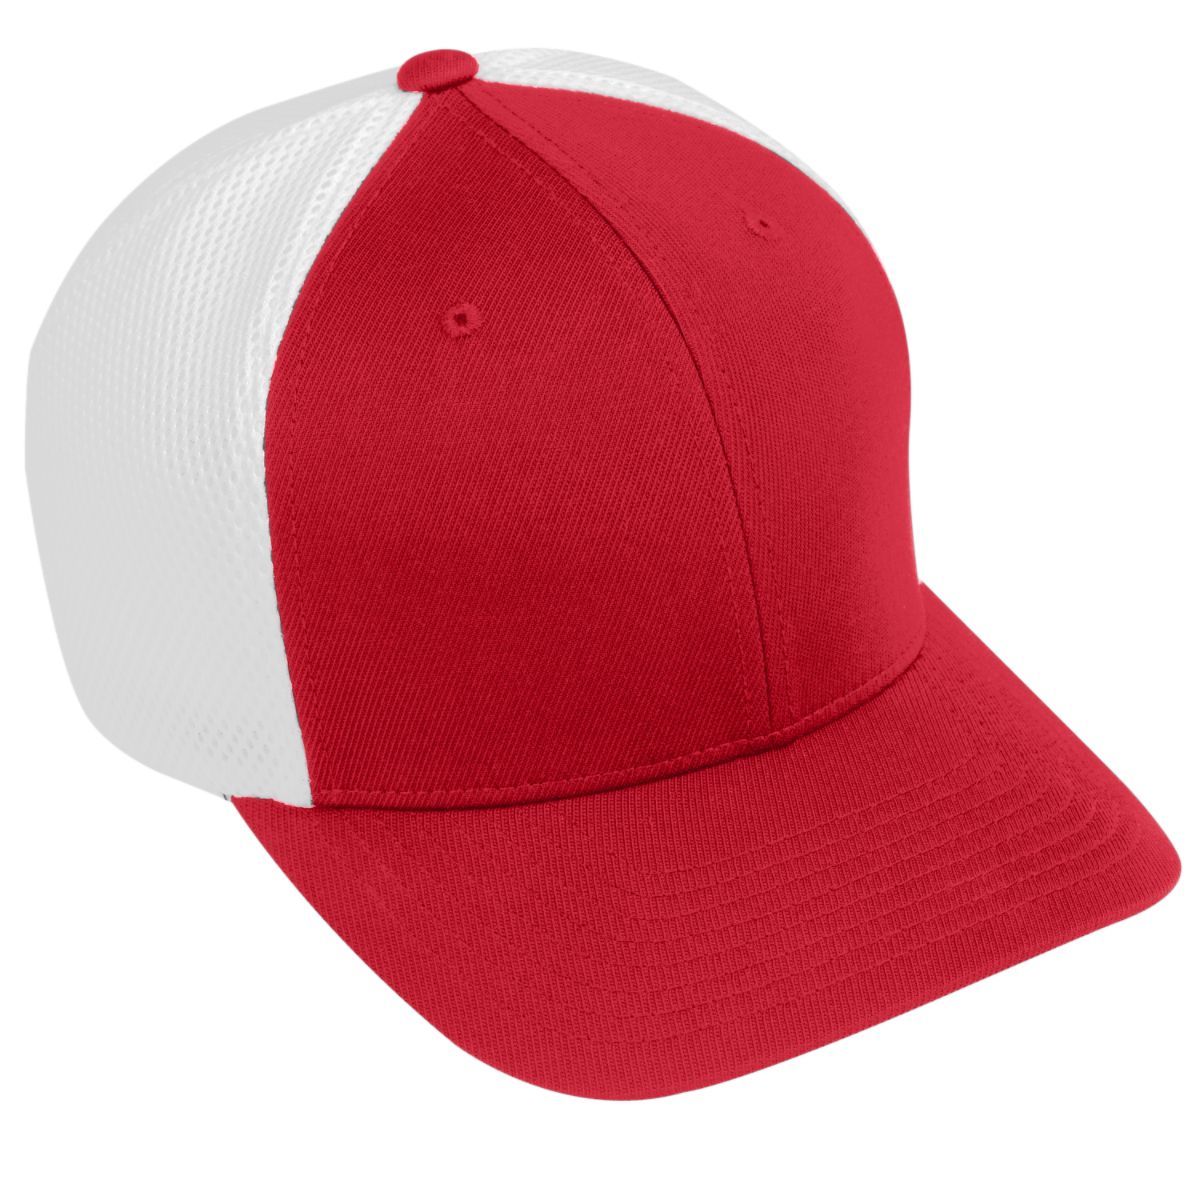 Augusta Sportswear Flexfit Vapor Cap in Red/White  -Part of the Adult, Augusta-Products, Headwear, Headwear-Cap product lines at KanaleyCreations.com